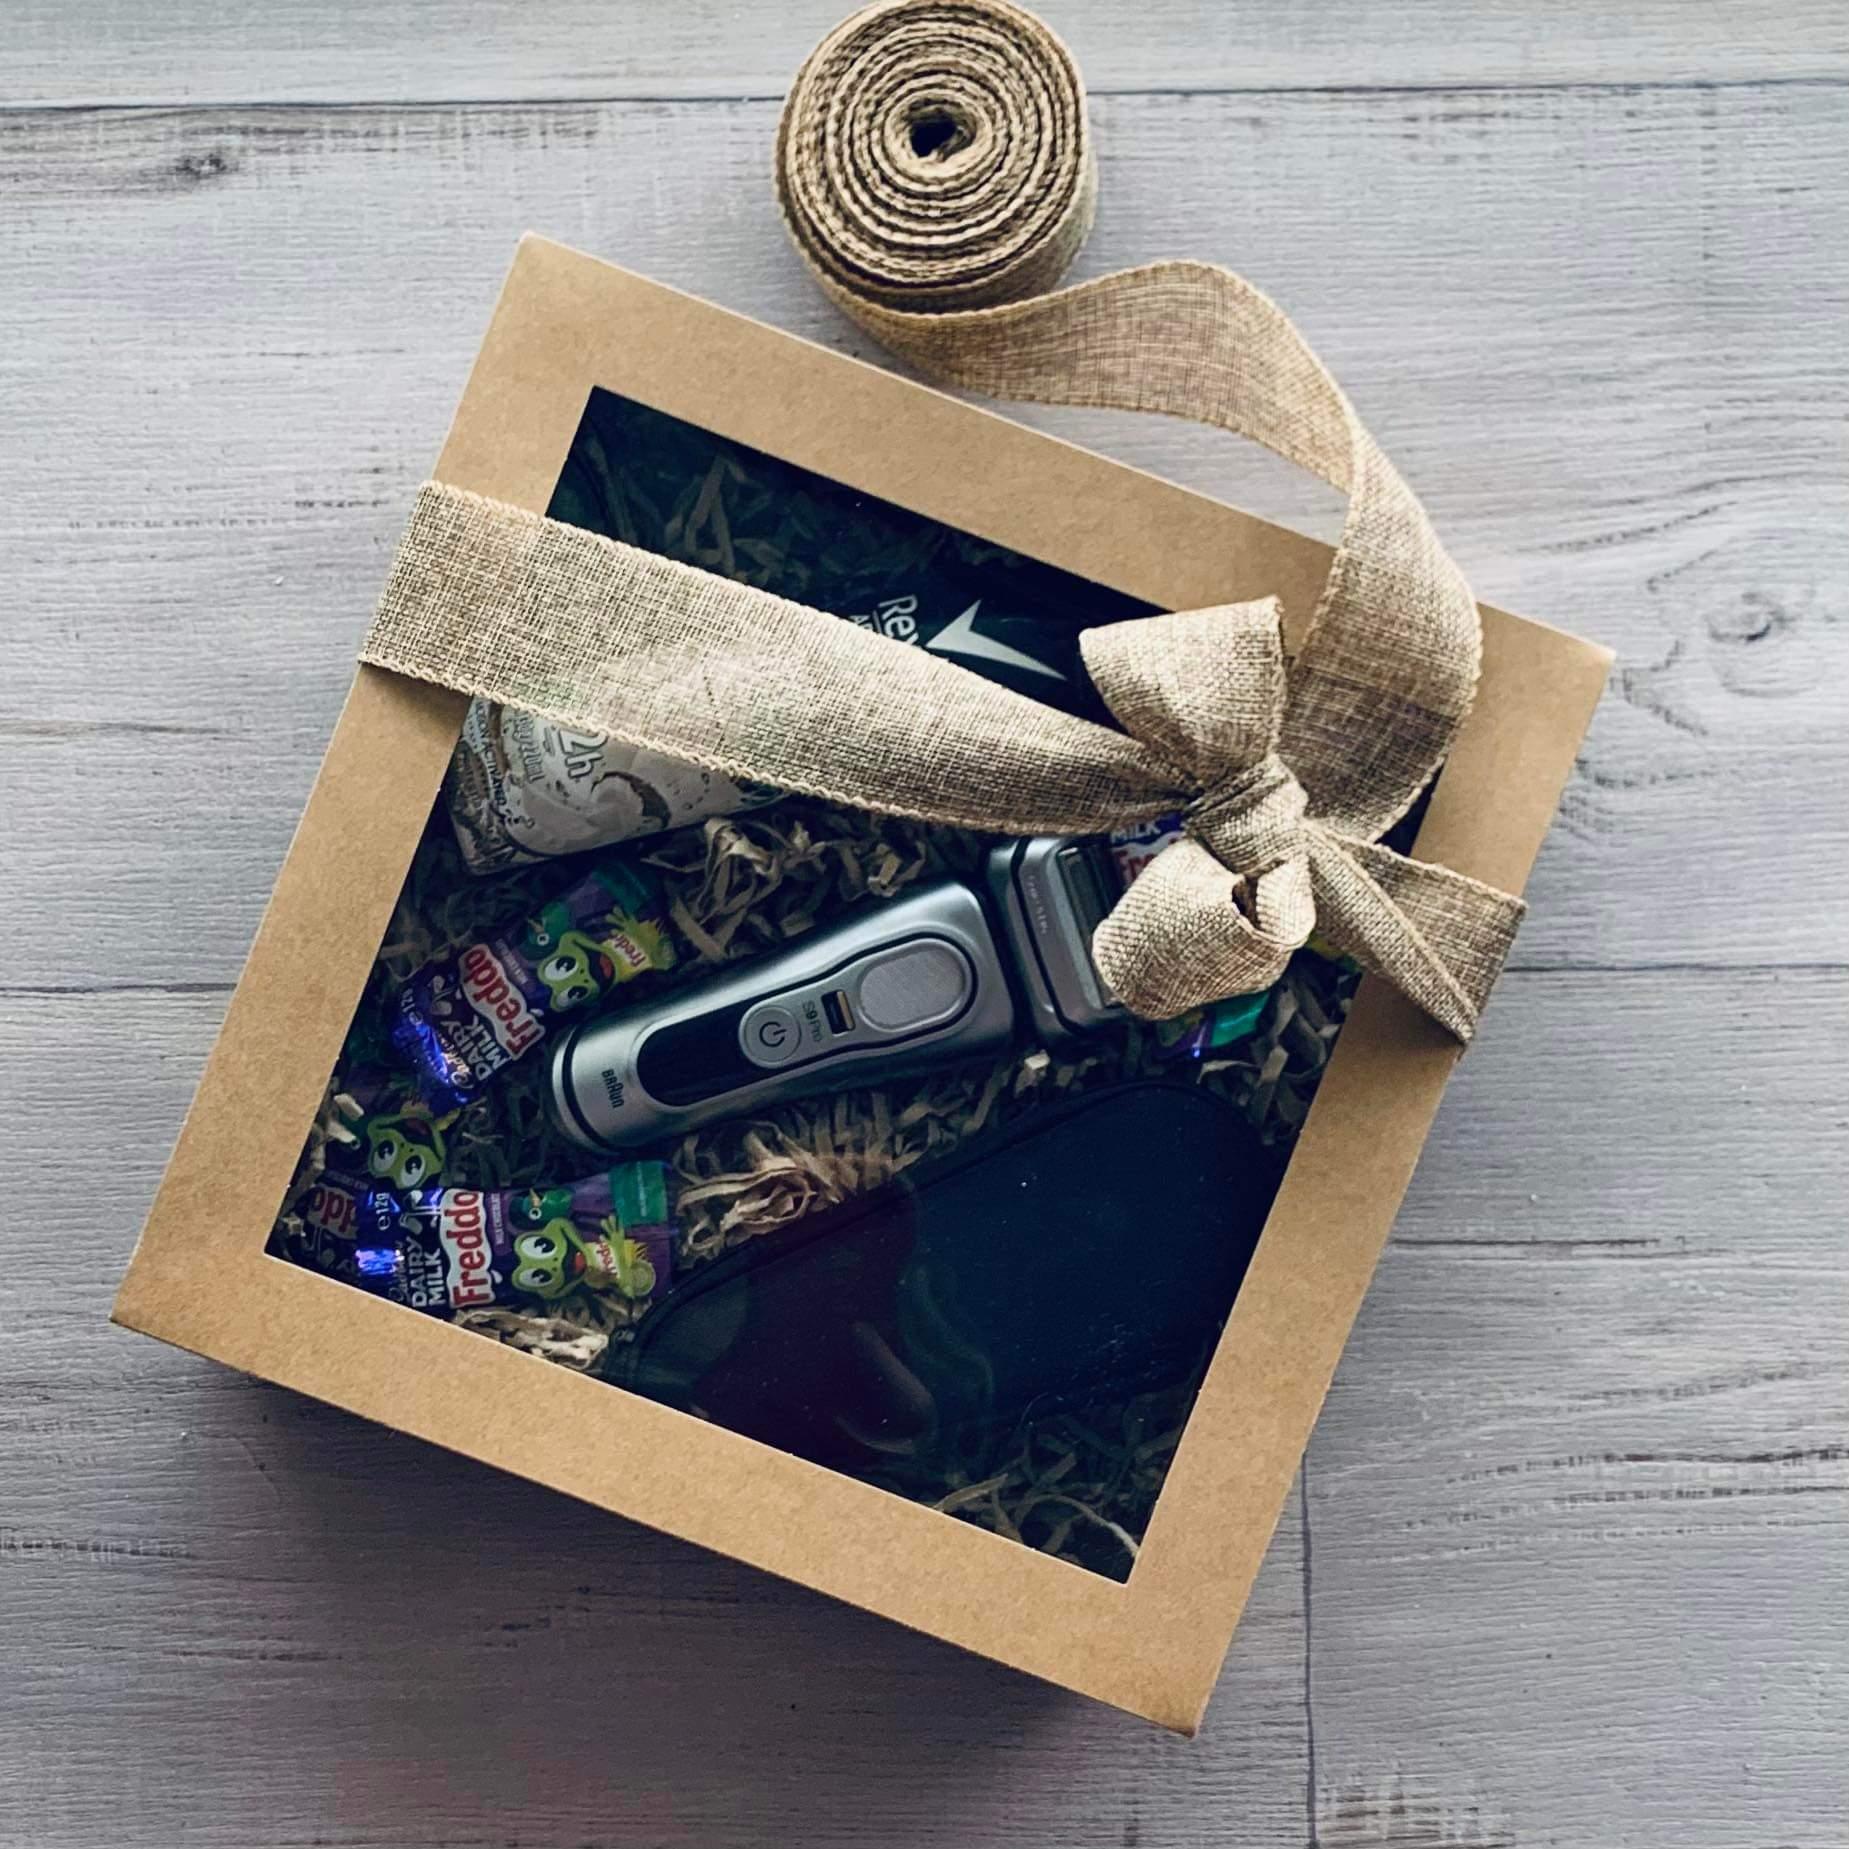 Father's Day Hampers & Gift Ideas - centaur packaging